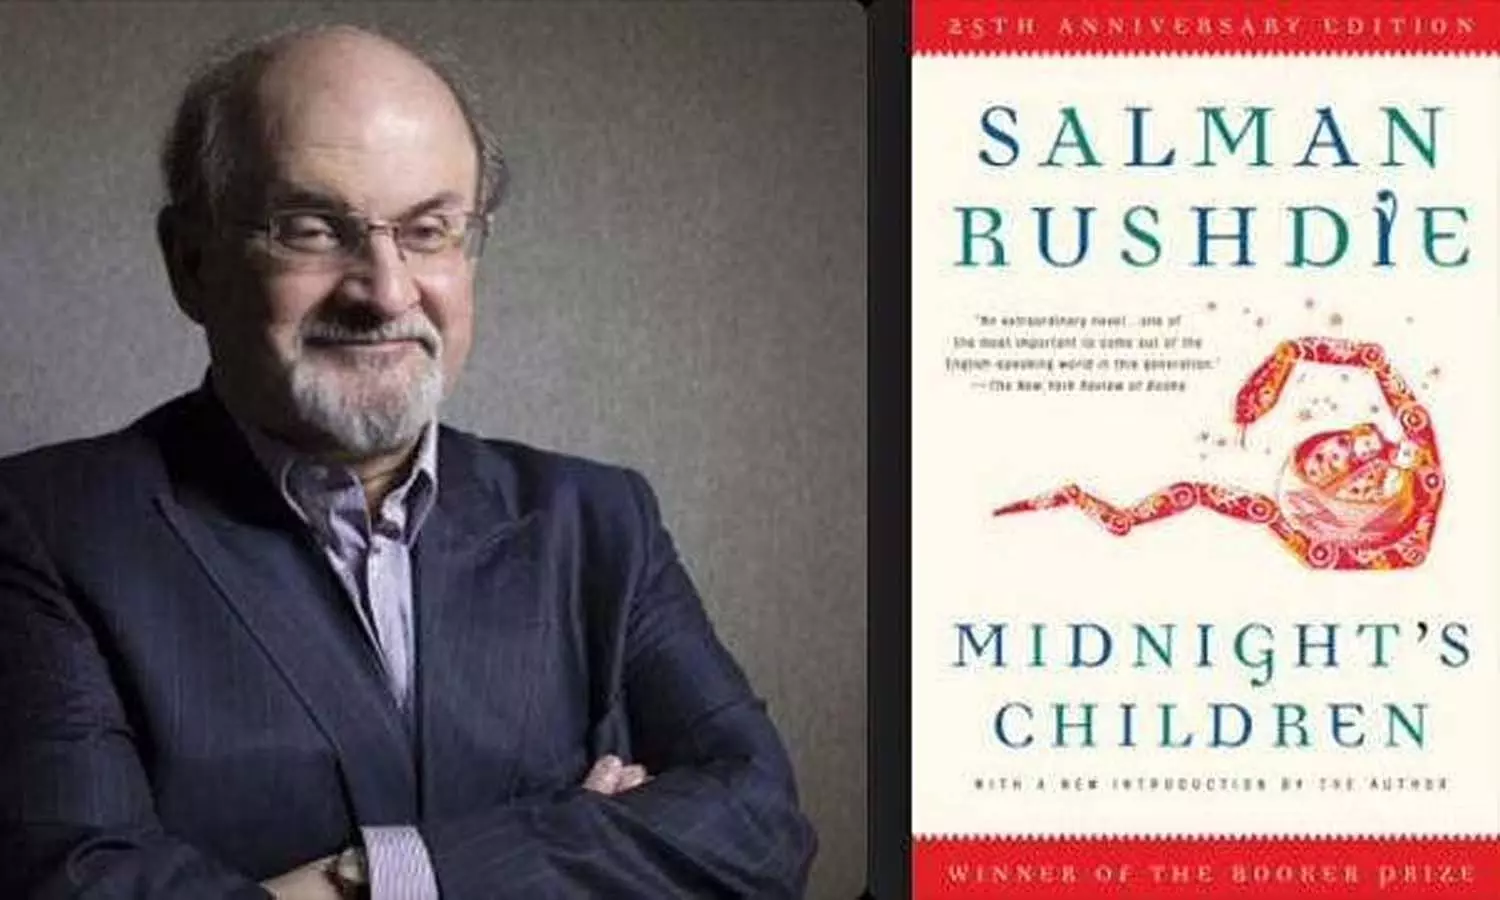 Midnights Children by Salman Rushdie A book depicting the transition period of independence and independence